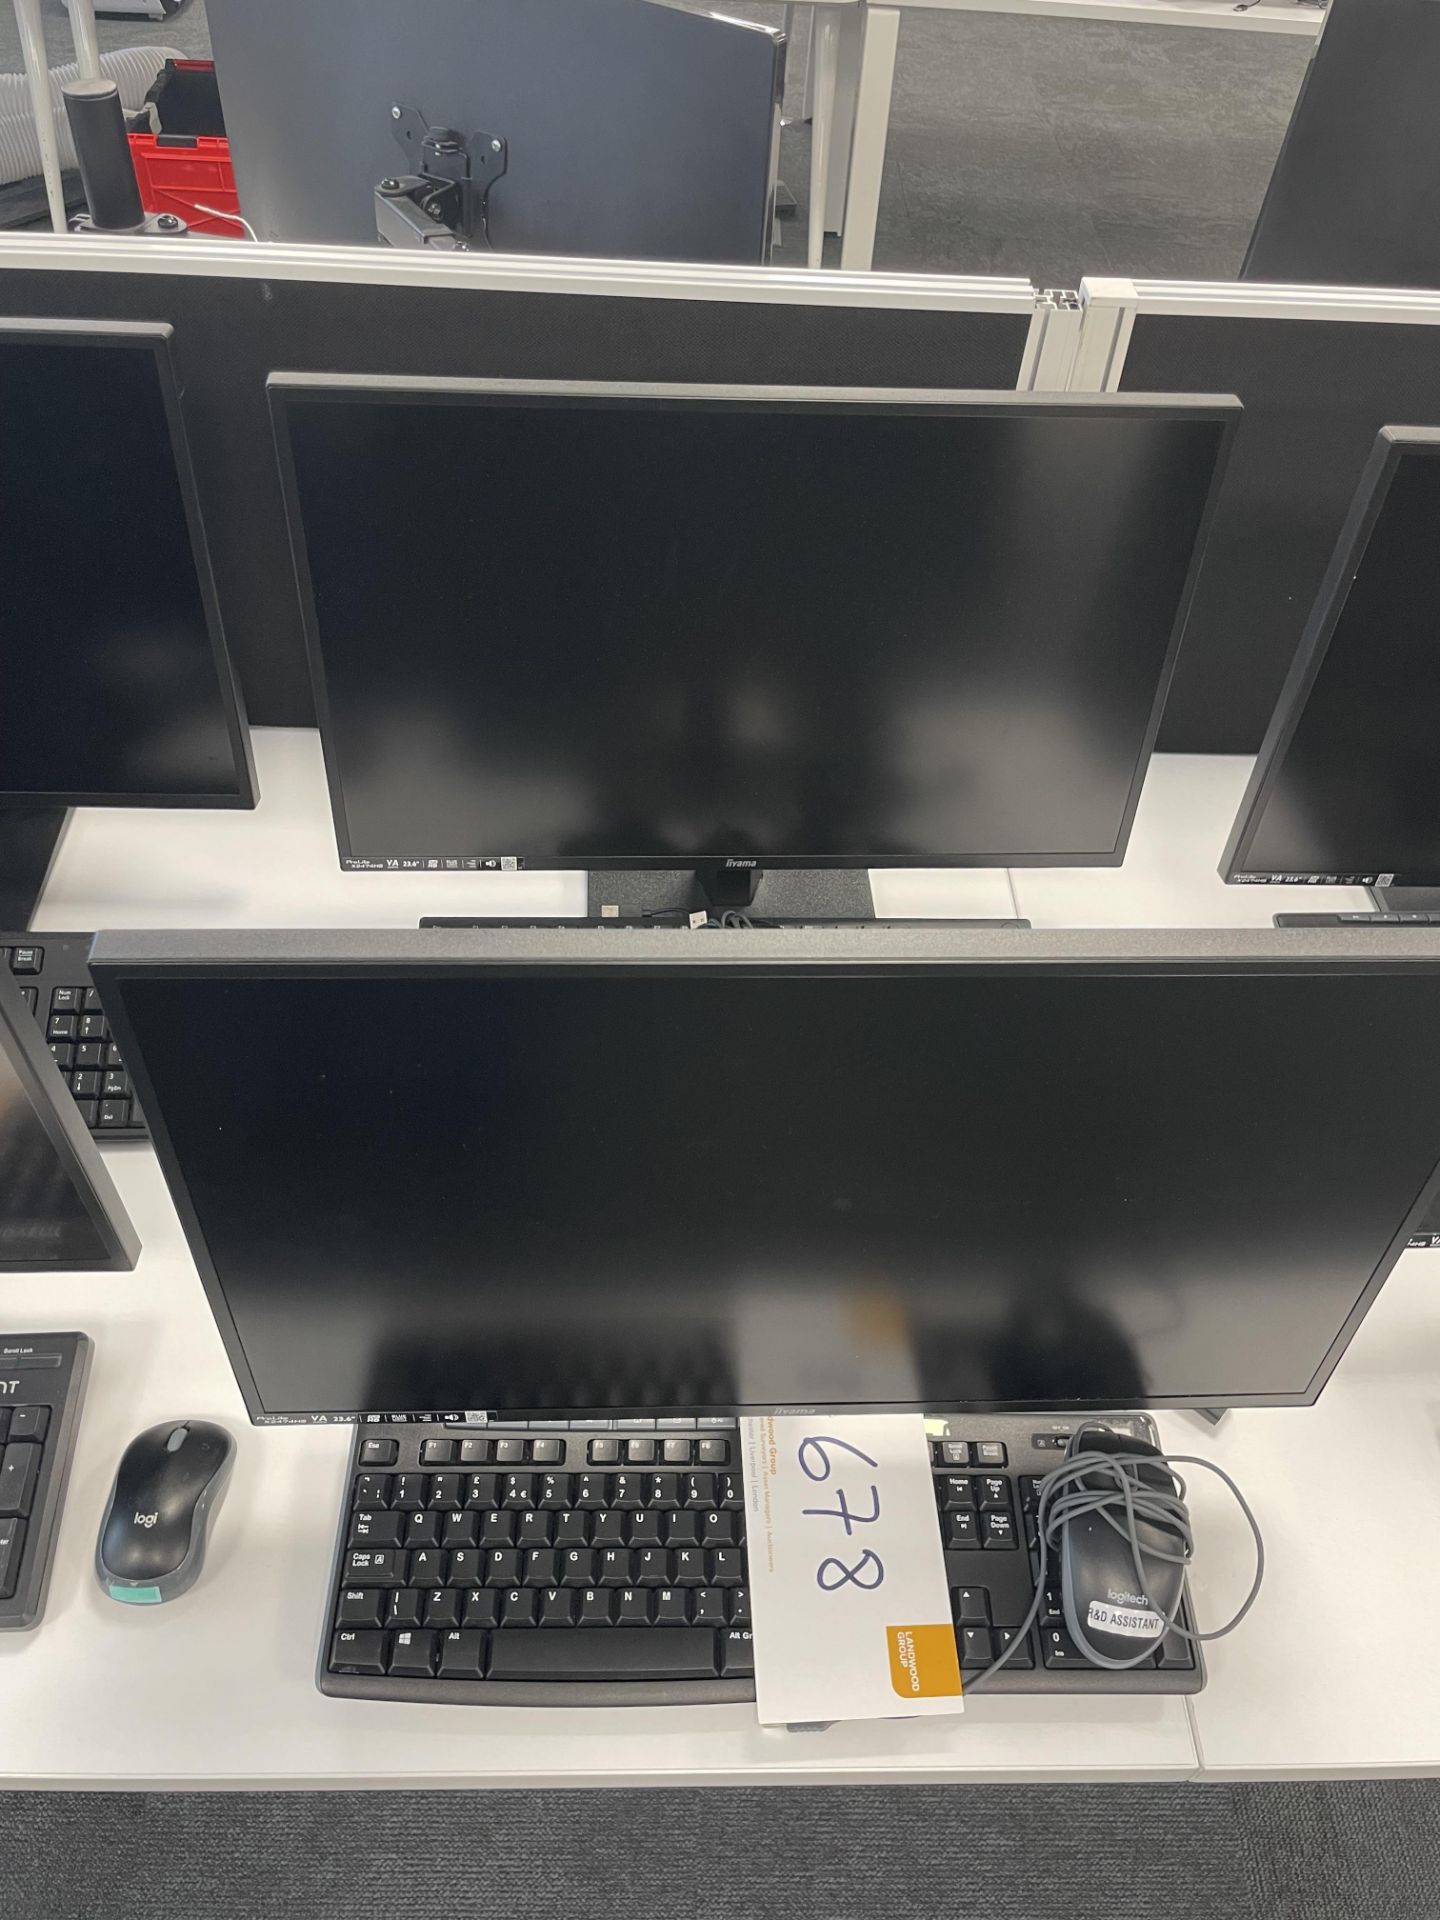 2 iiyama ProLite X2474HS monitors each with keyboard and mouse.